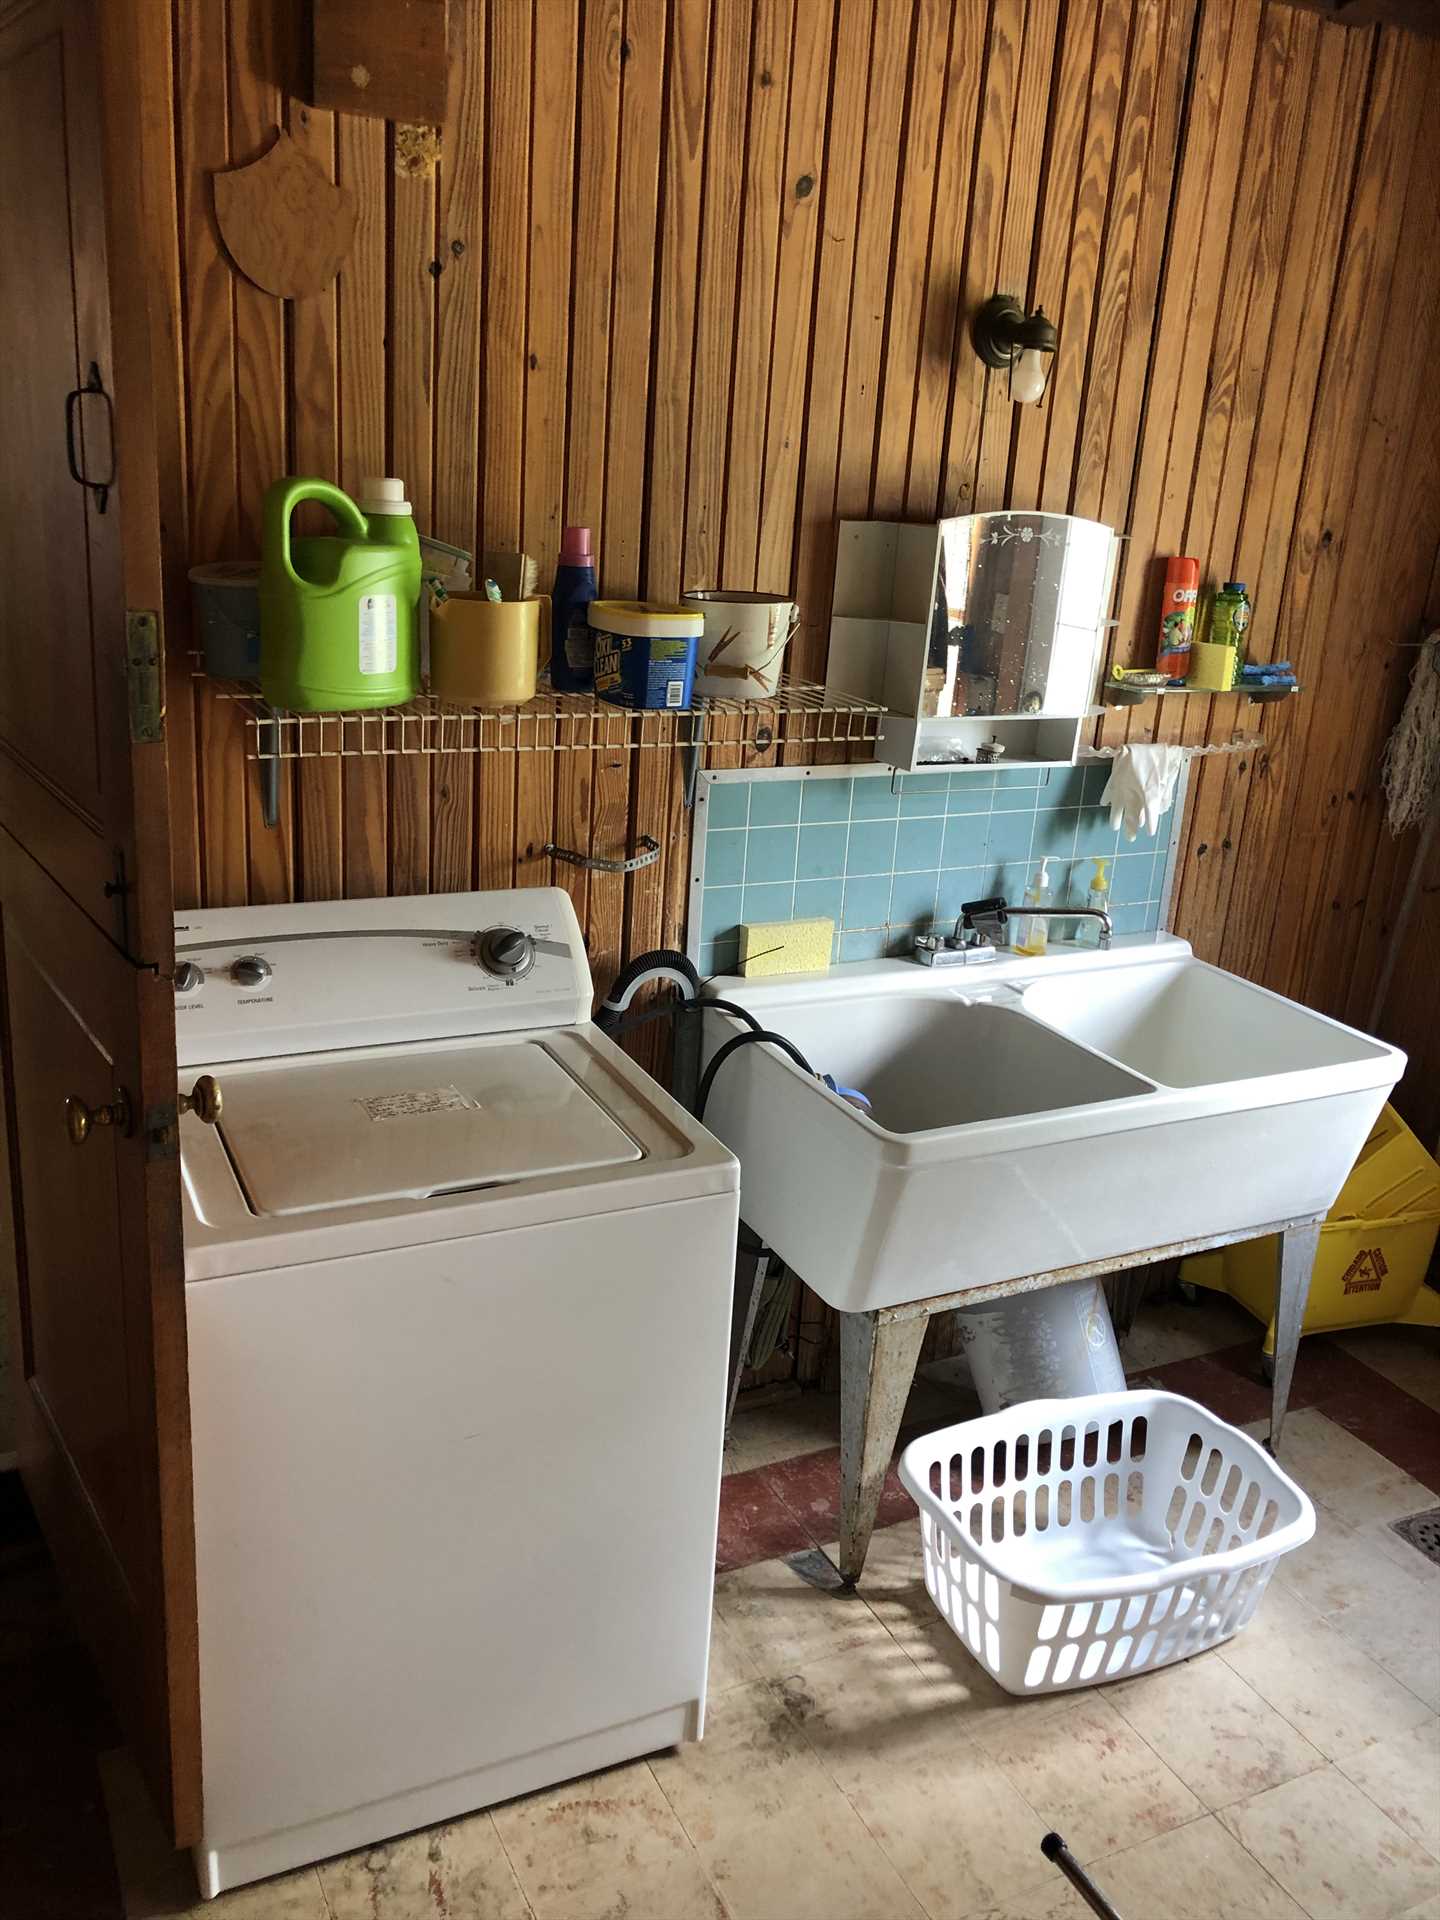                                                 The utility room includes a washer and dryer, and an industrial double sink, for your cleanup convenience.